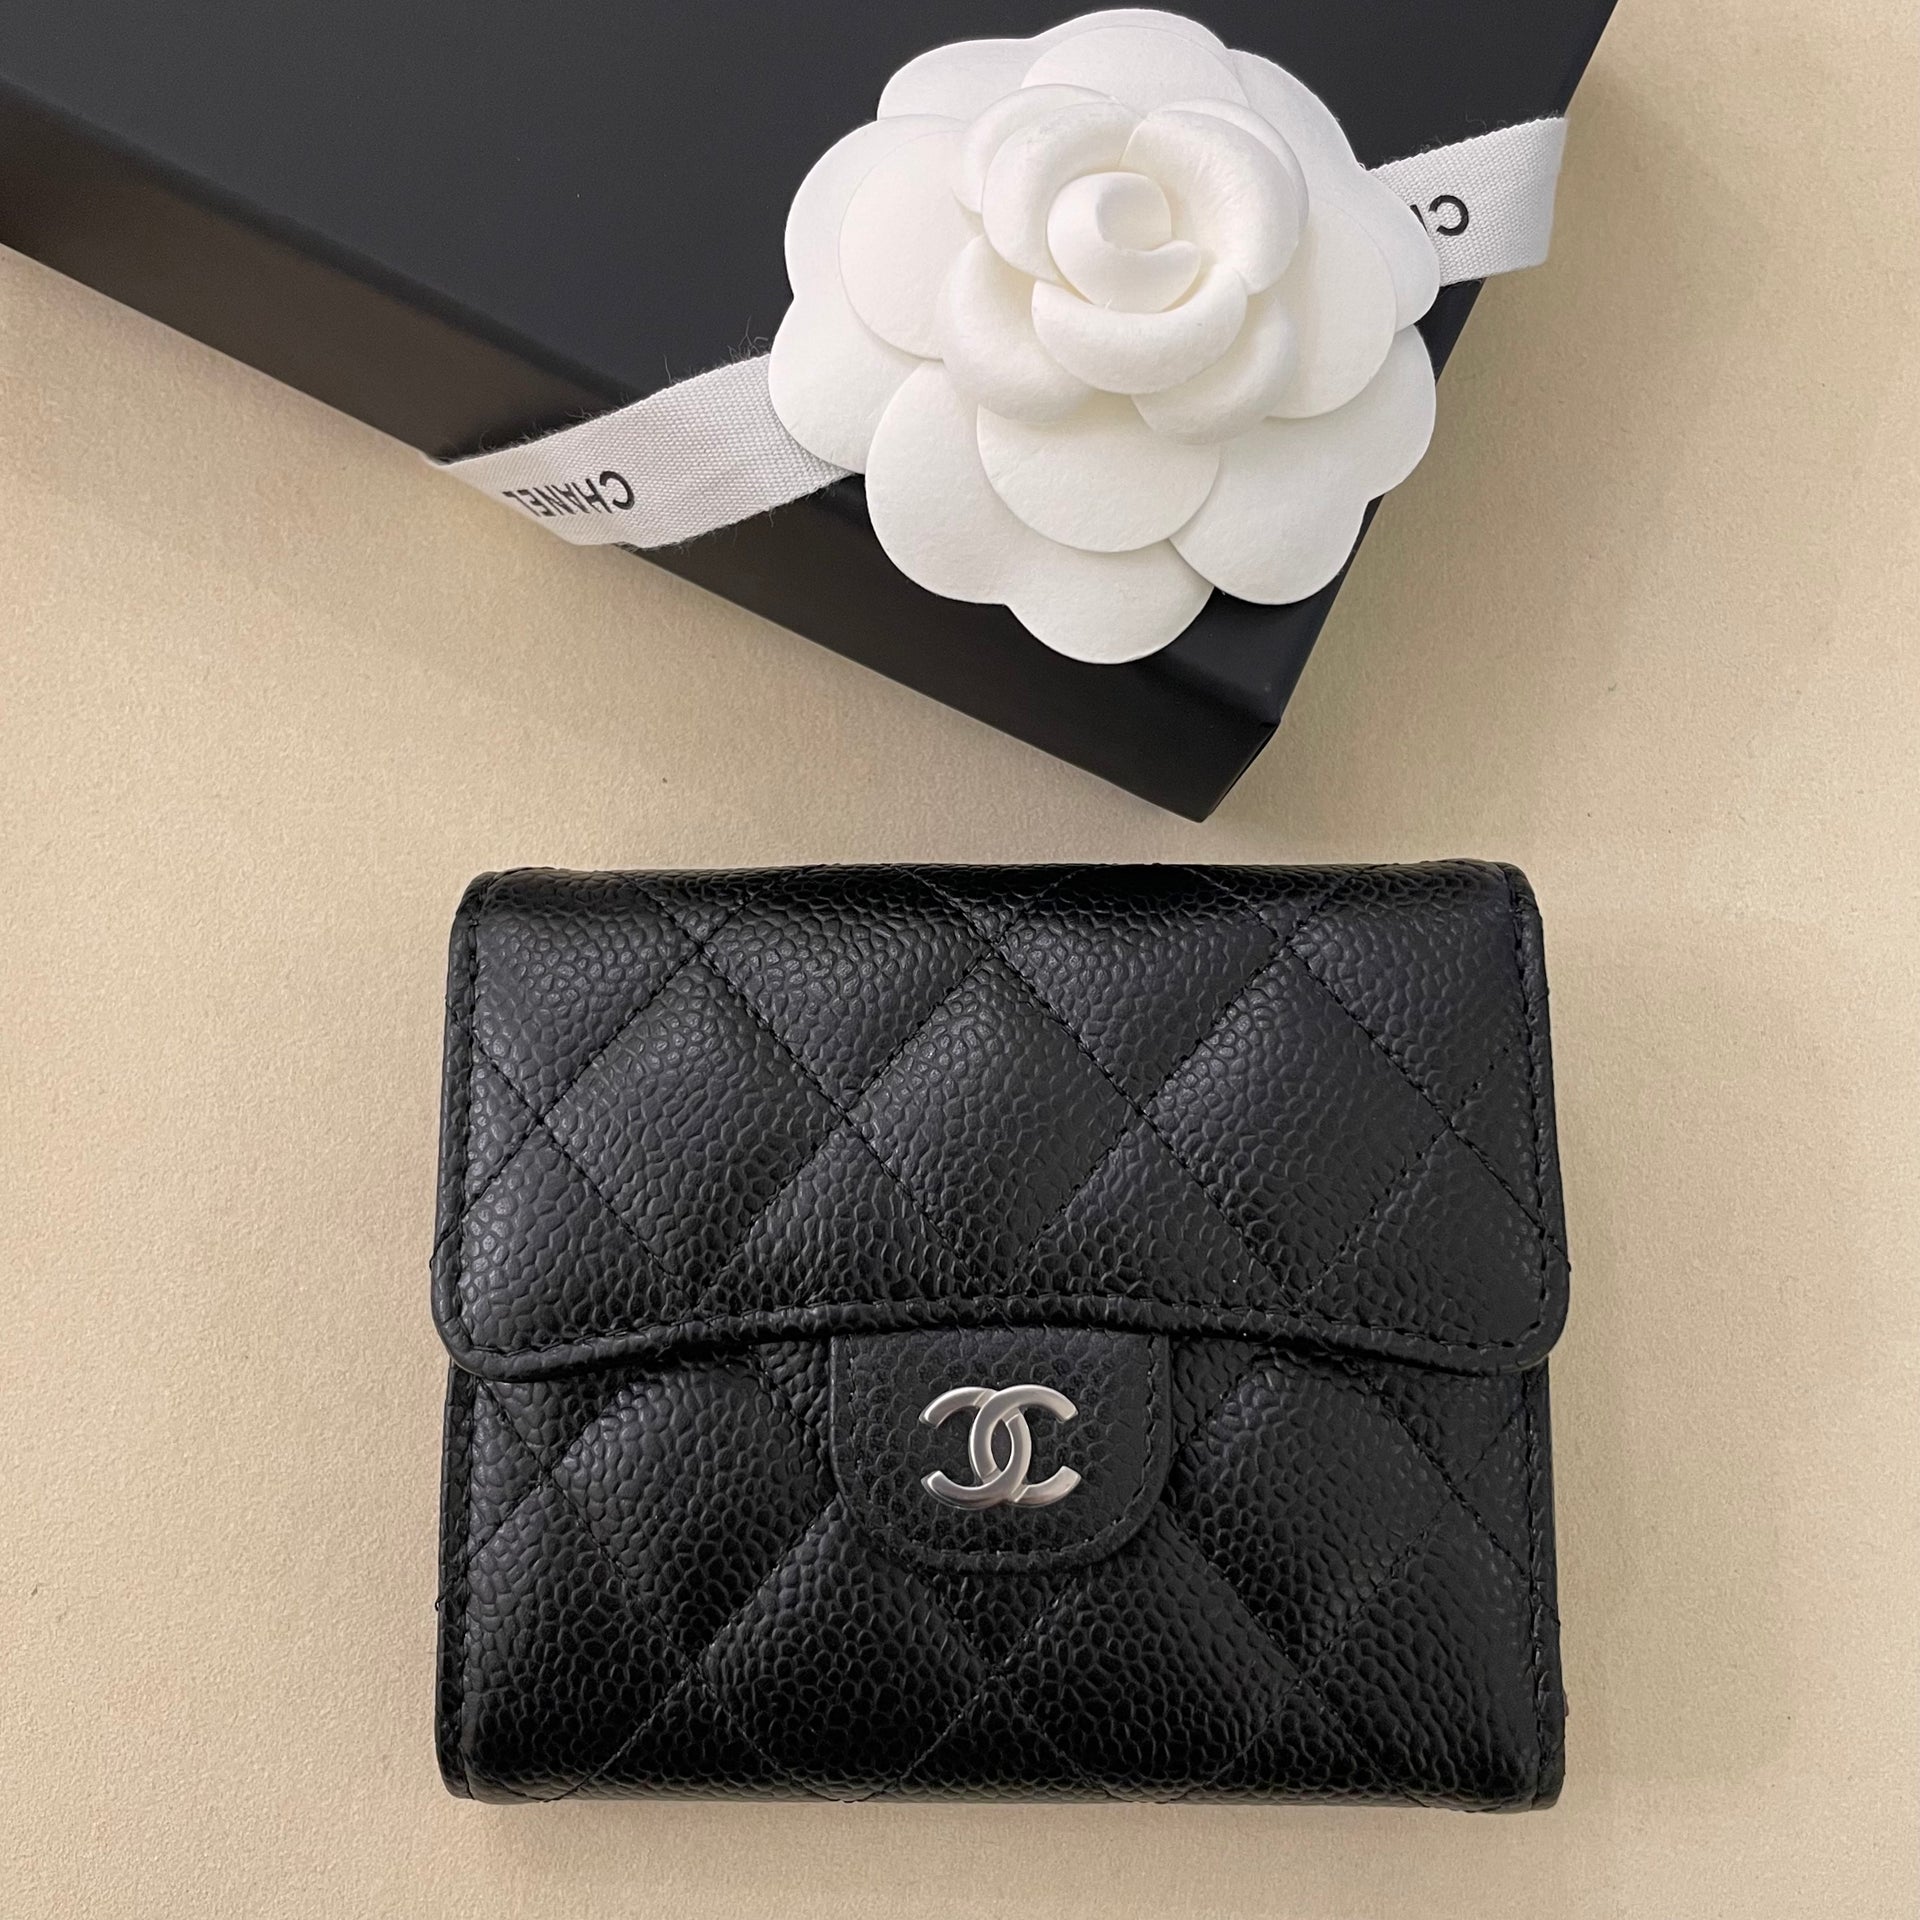 Chanel: Meet The Fun & Functional Classic Small Flap Wallet